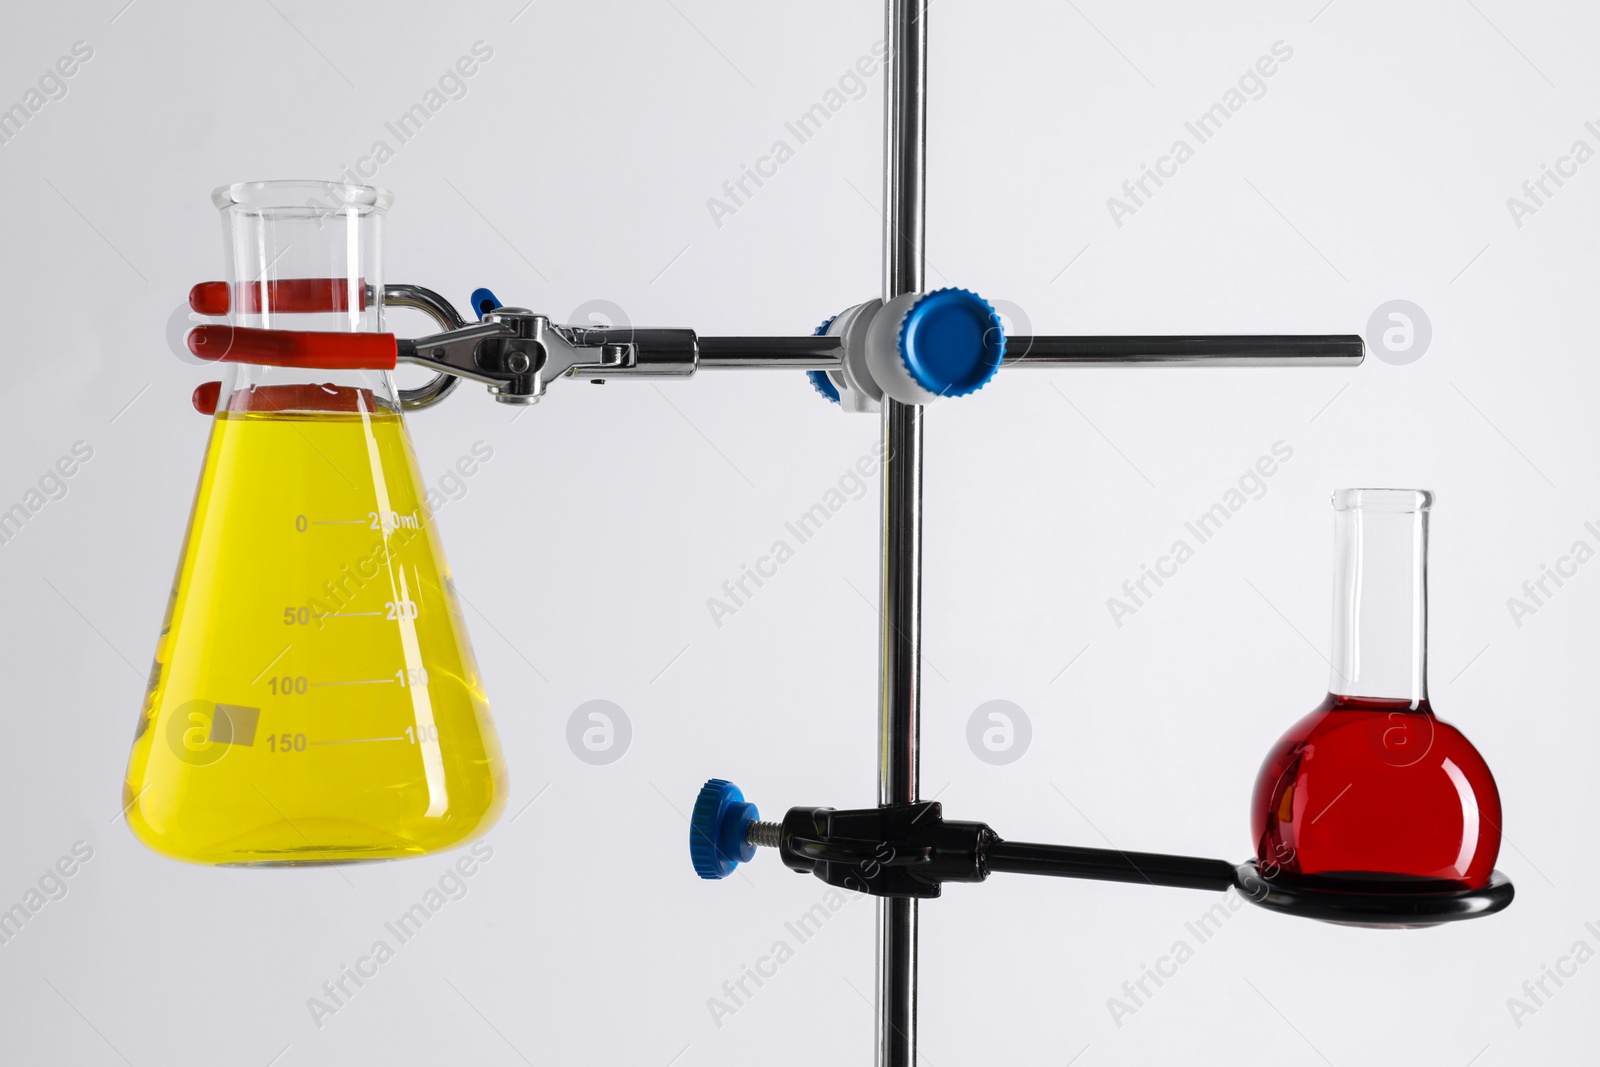 Photo of Retort stand and laboratory flasks with liquids on white background